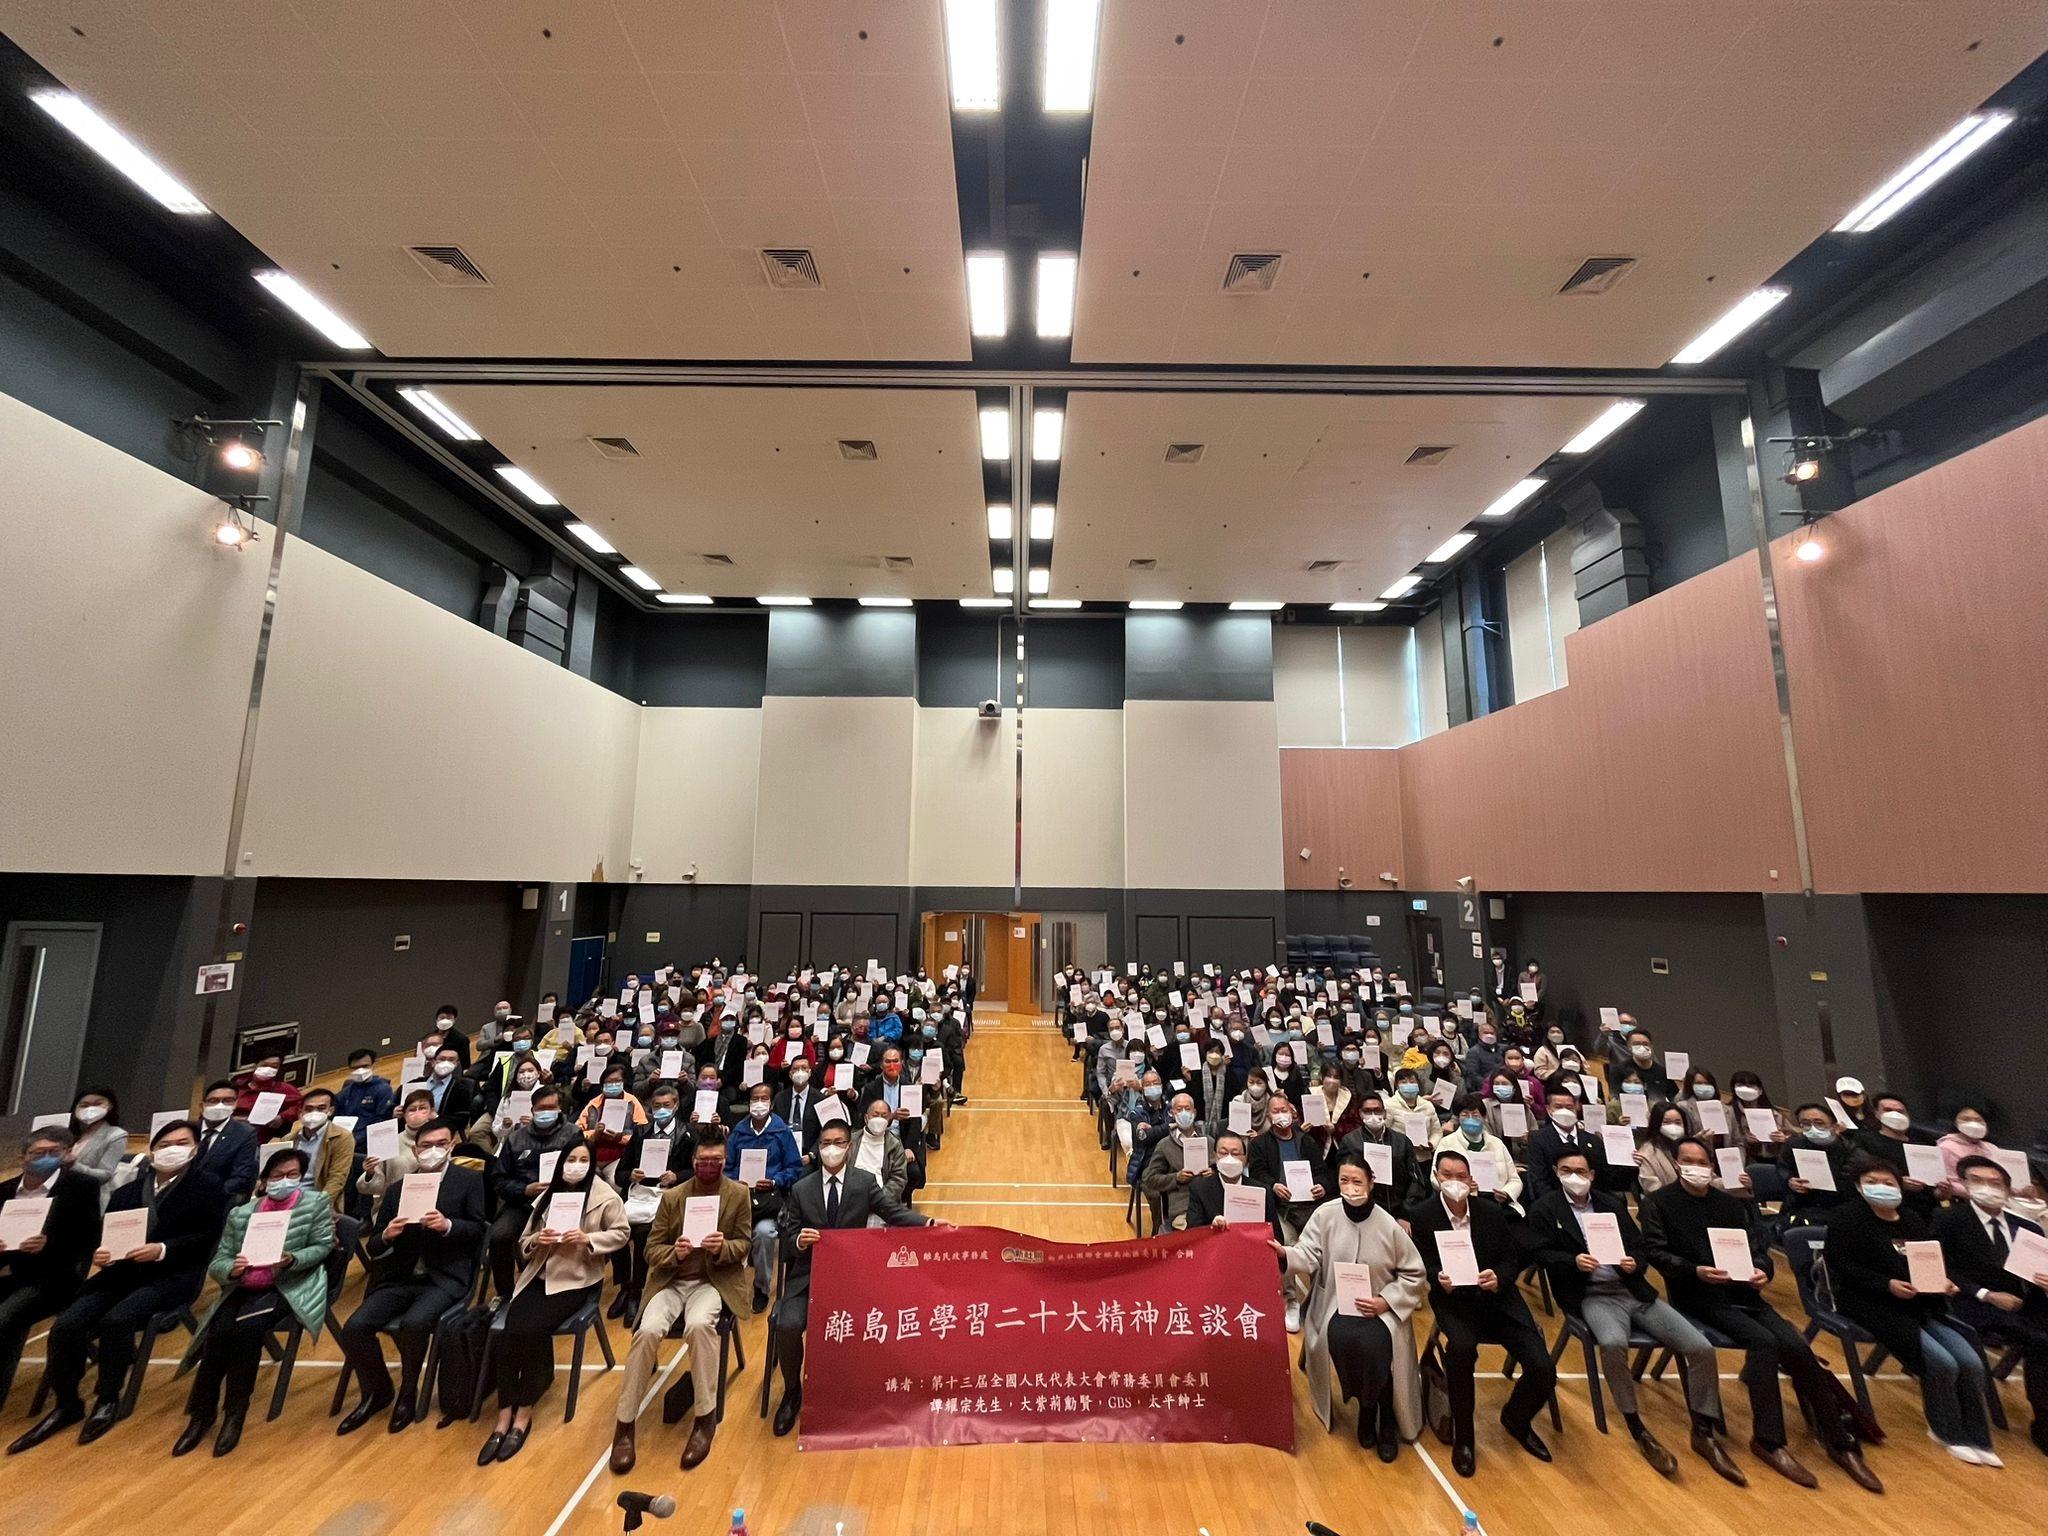 The Islands District Office, together with the New Territories Association of Societies Islands District Committee, today (December 13) held a session on "Spirit of the 20th National Congress of the CPC" at Tung Chung Community Hall. Photo shows guests and participants at the session.